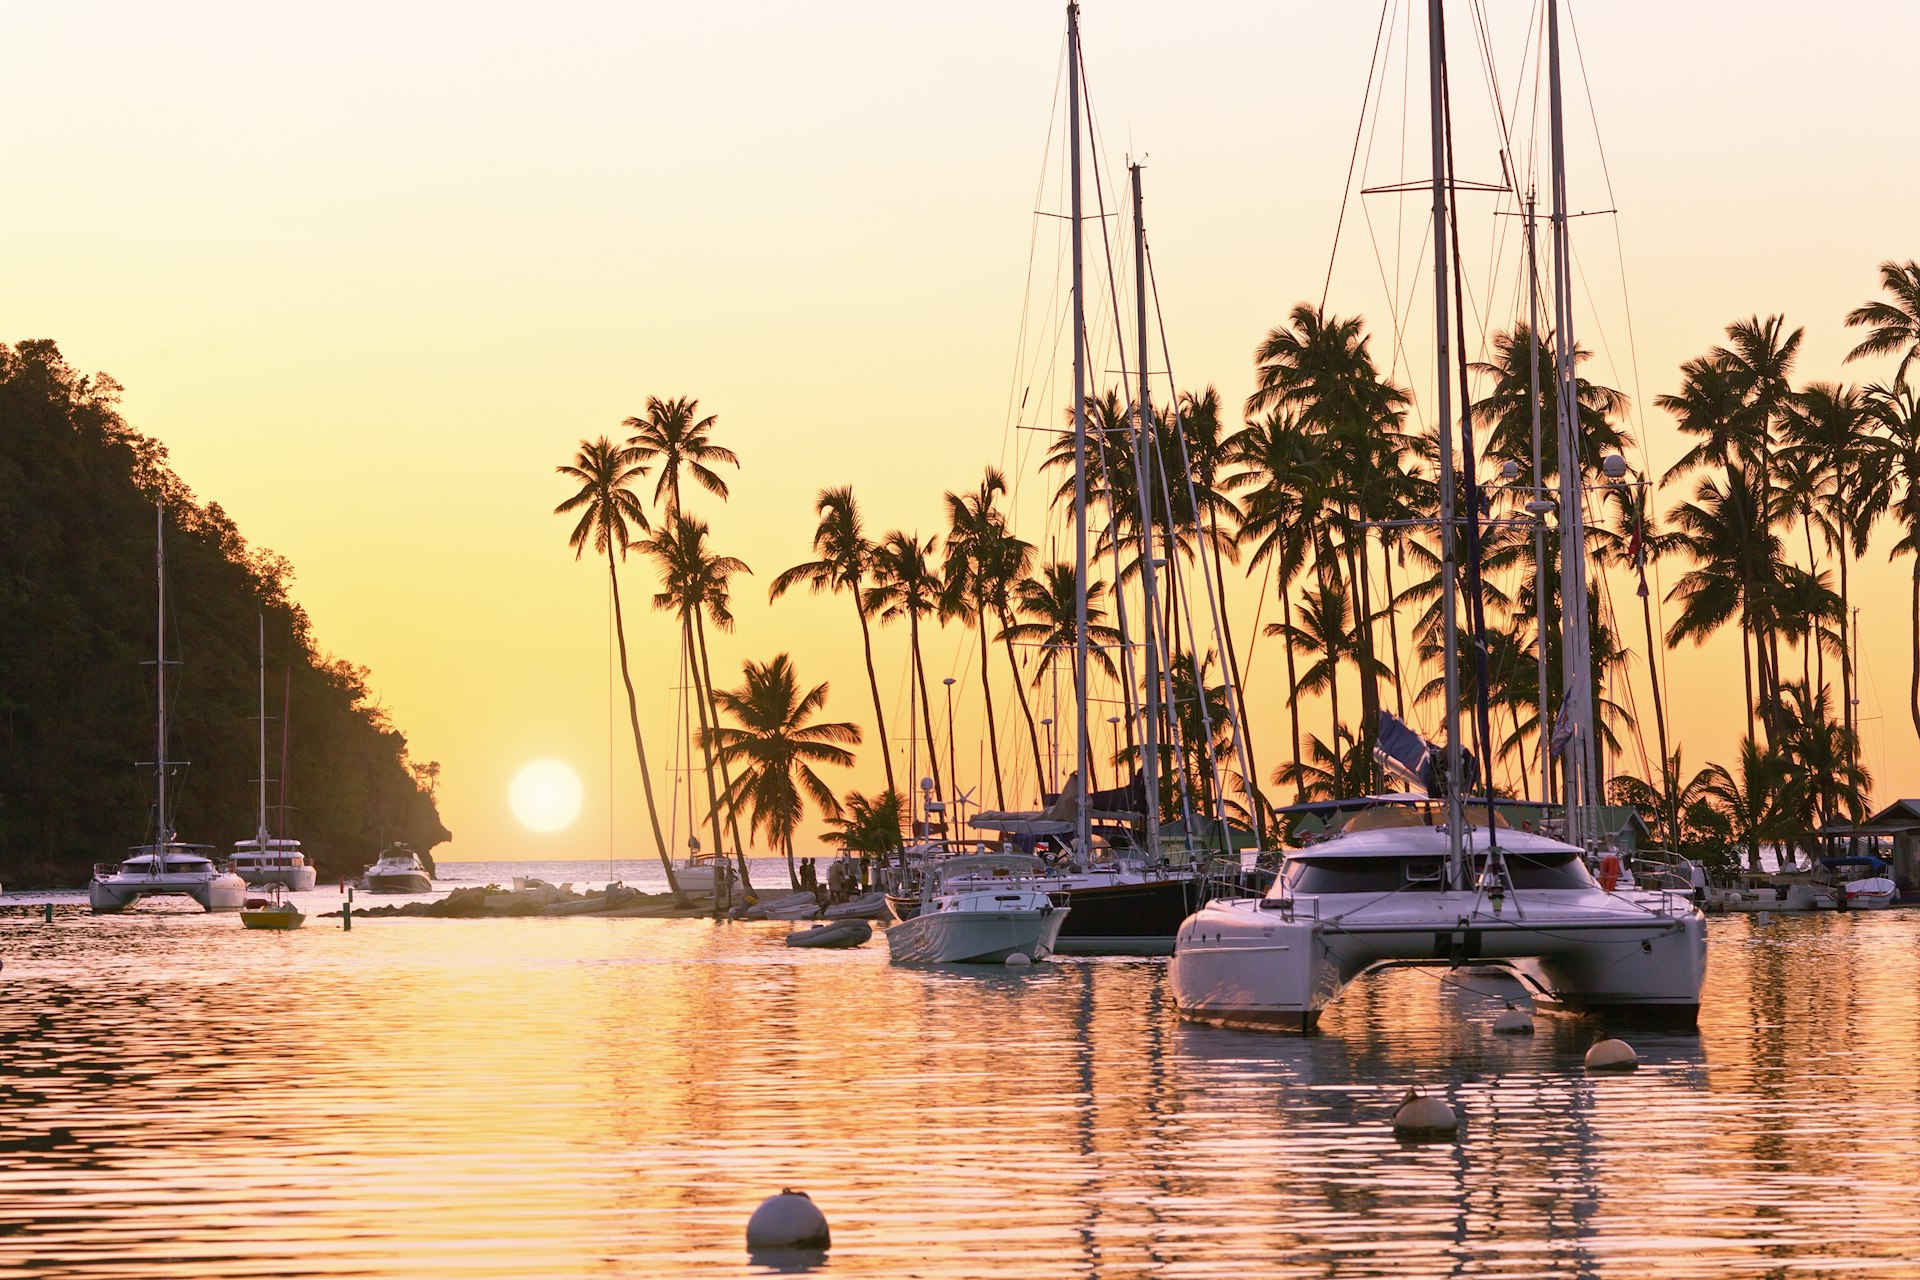 A collection of boats of various sizes float in the calm waters of Marigot Bay at sunset in St Lucia 